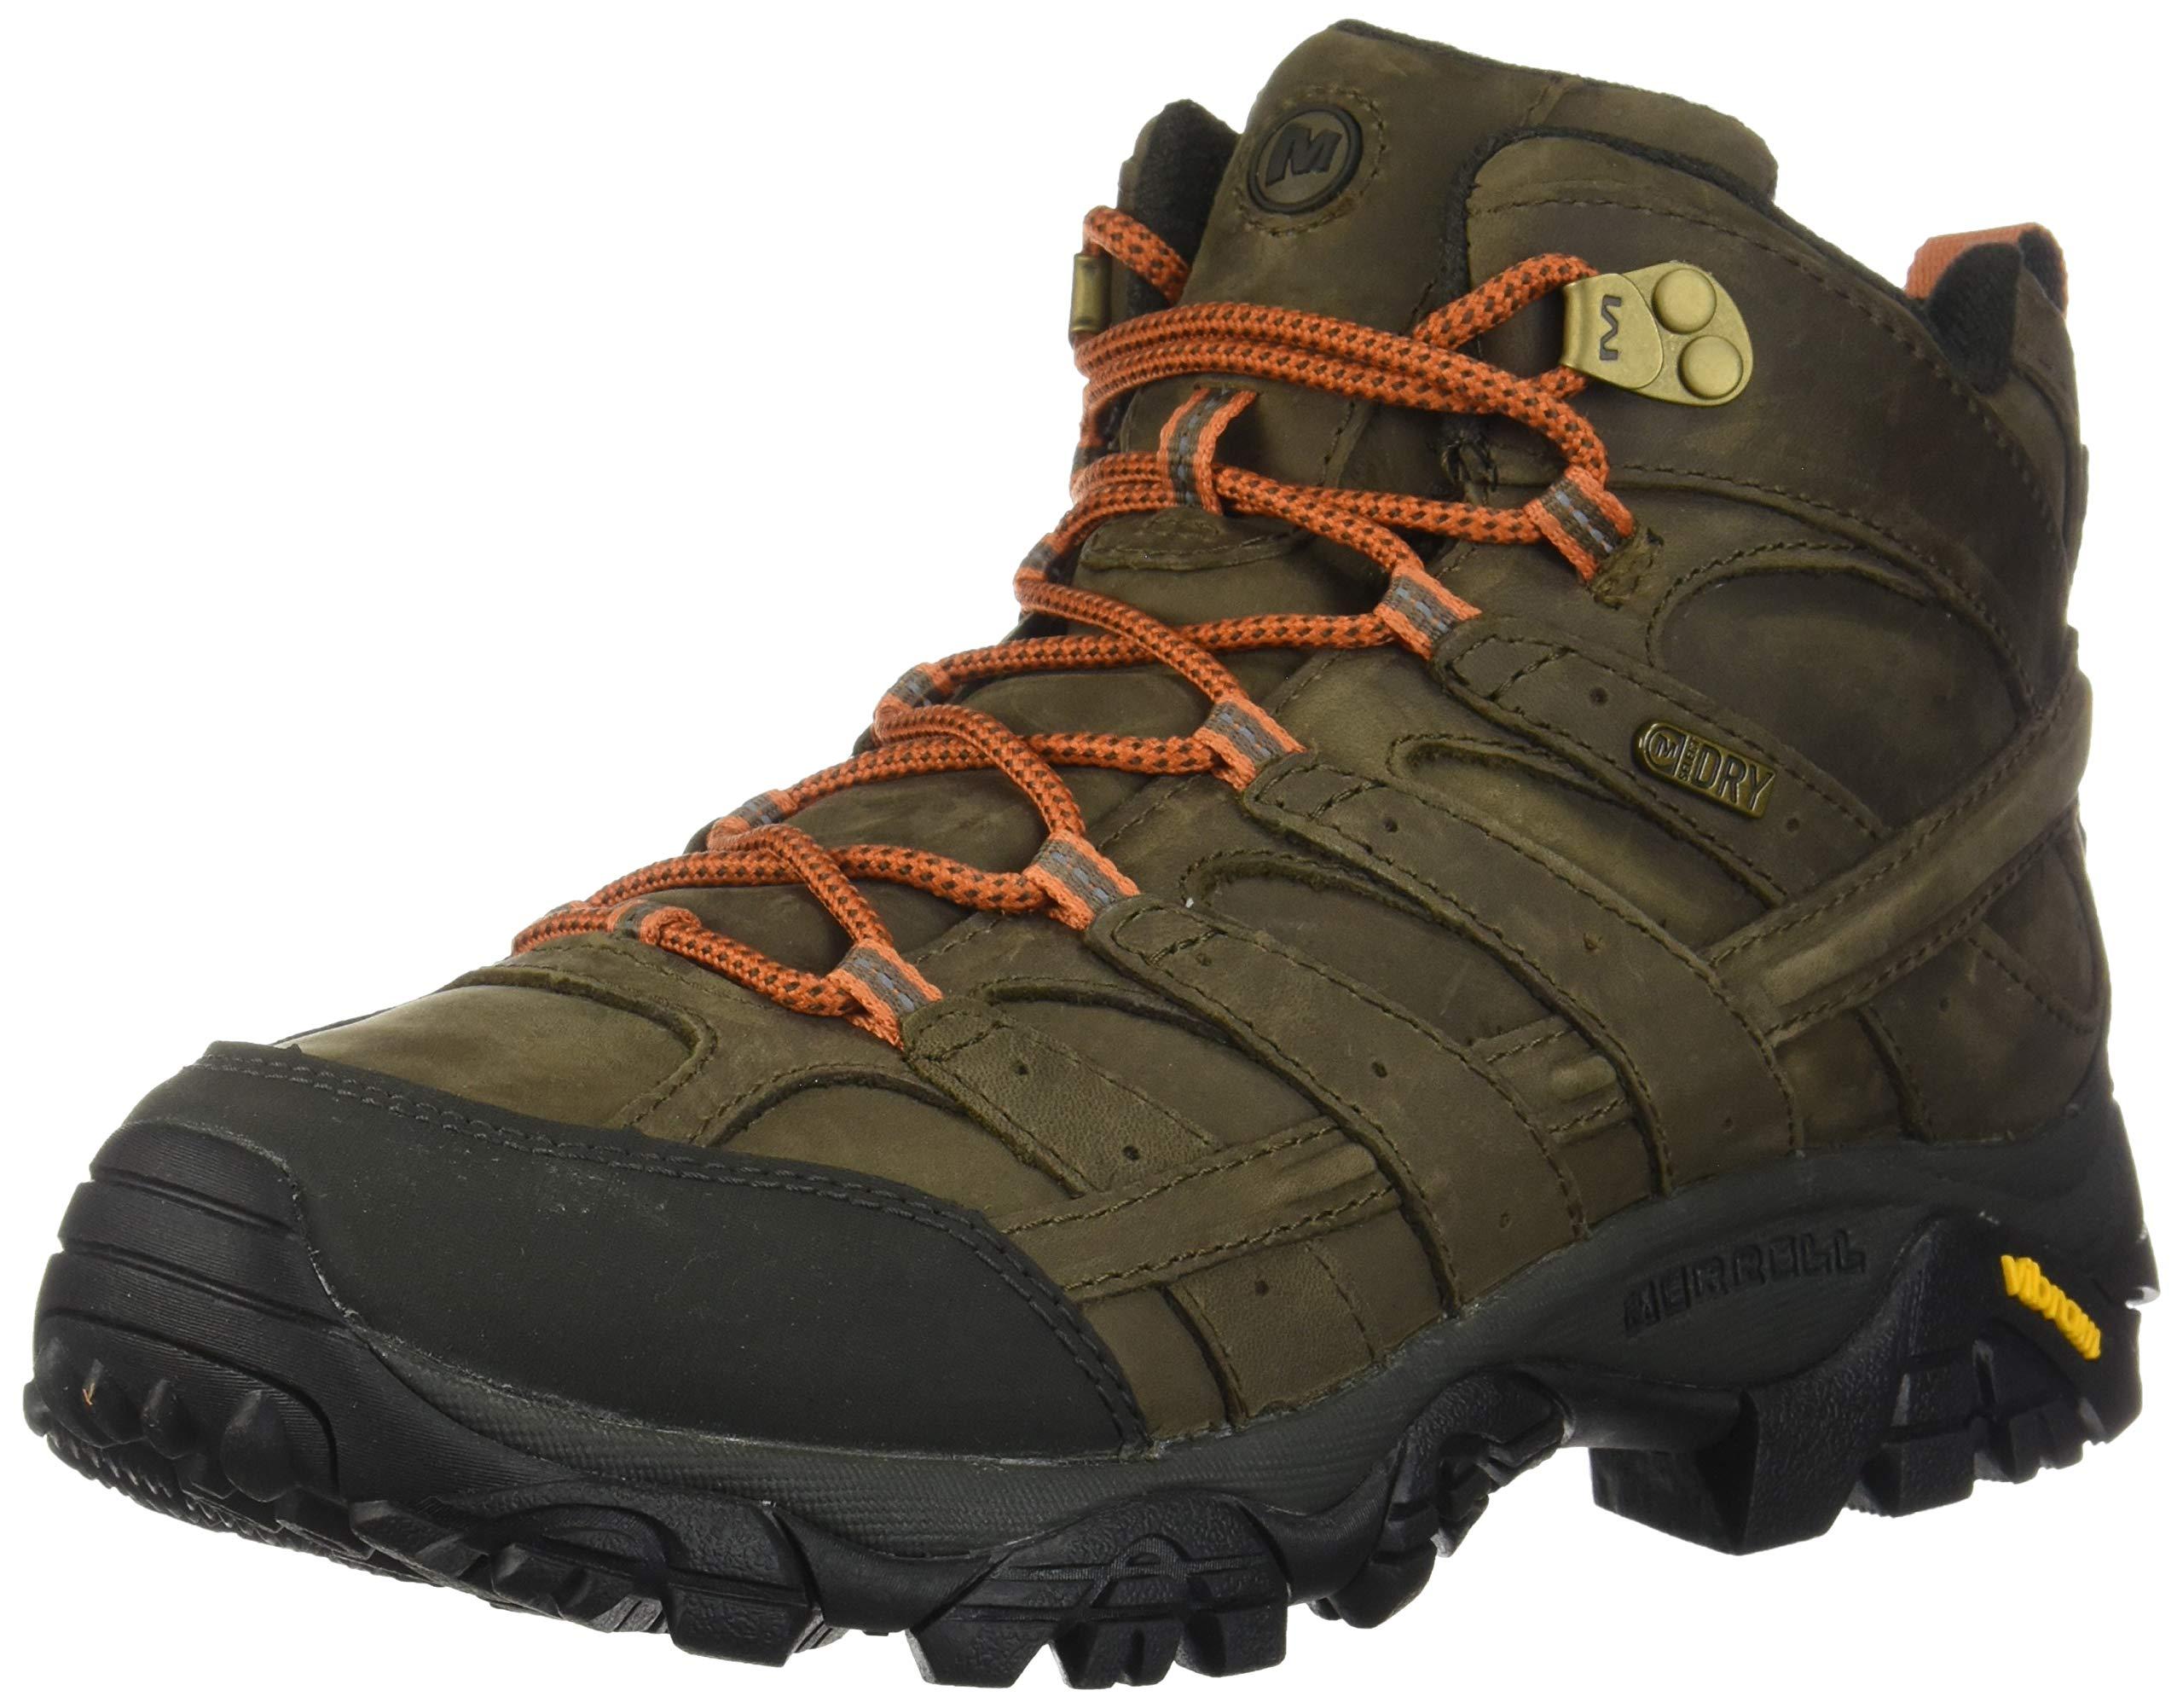 Merrell Moab 2 Prime Mid Waterproof Hiking Boot in Brown for Men - Save ...